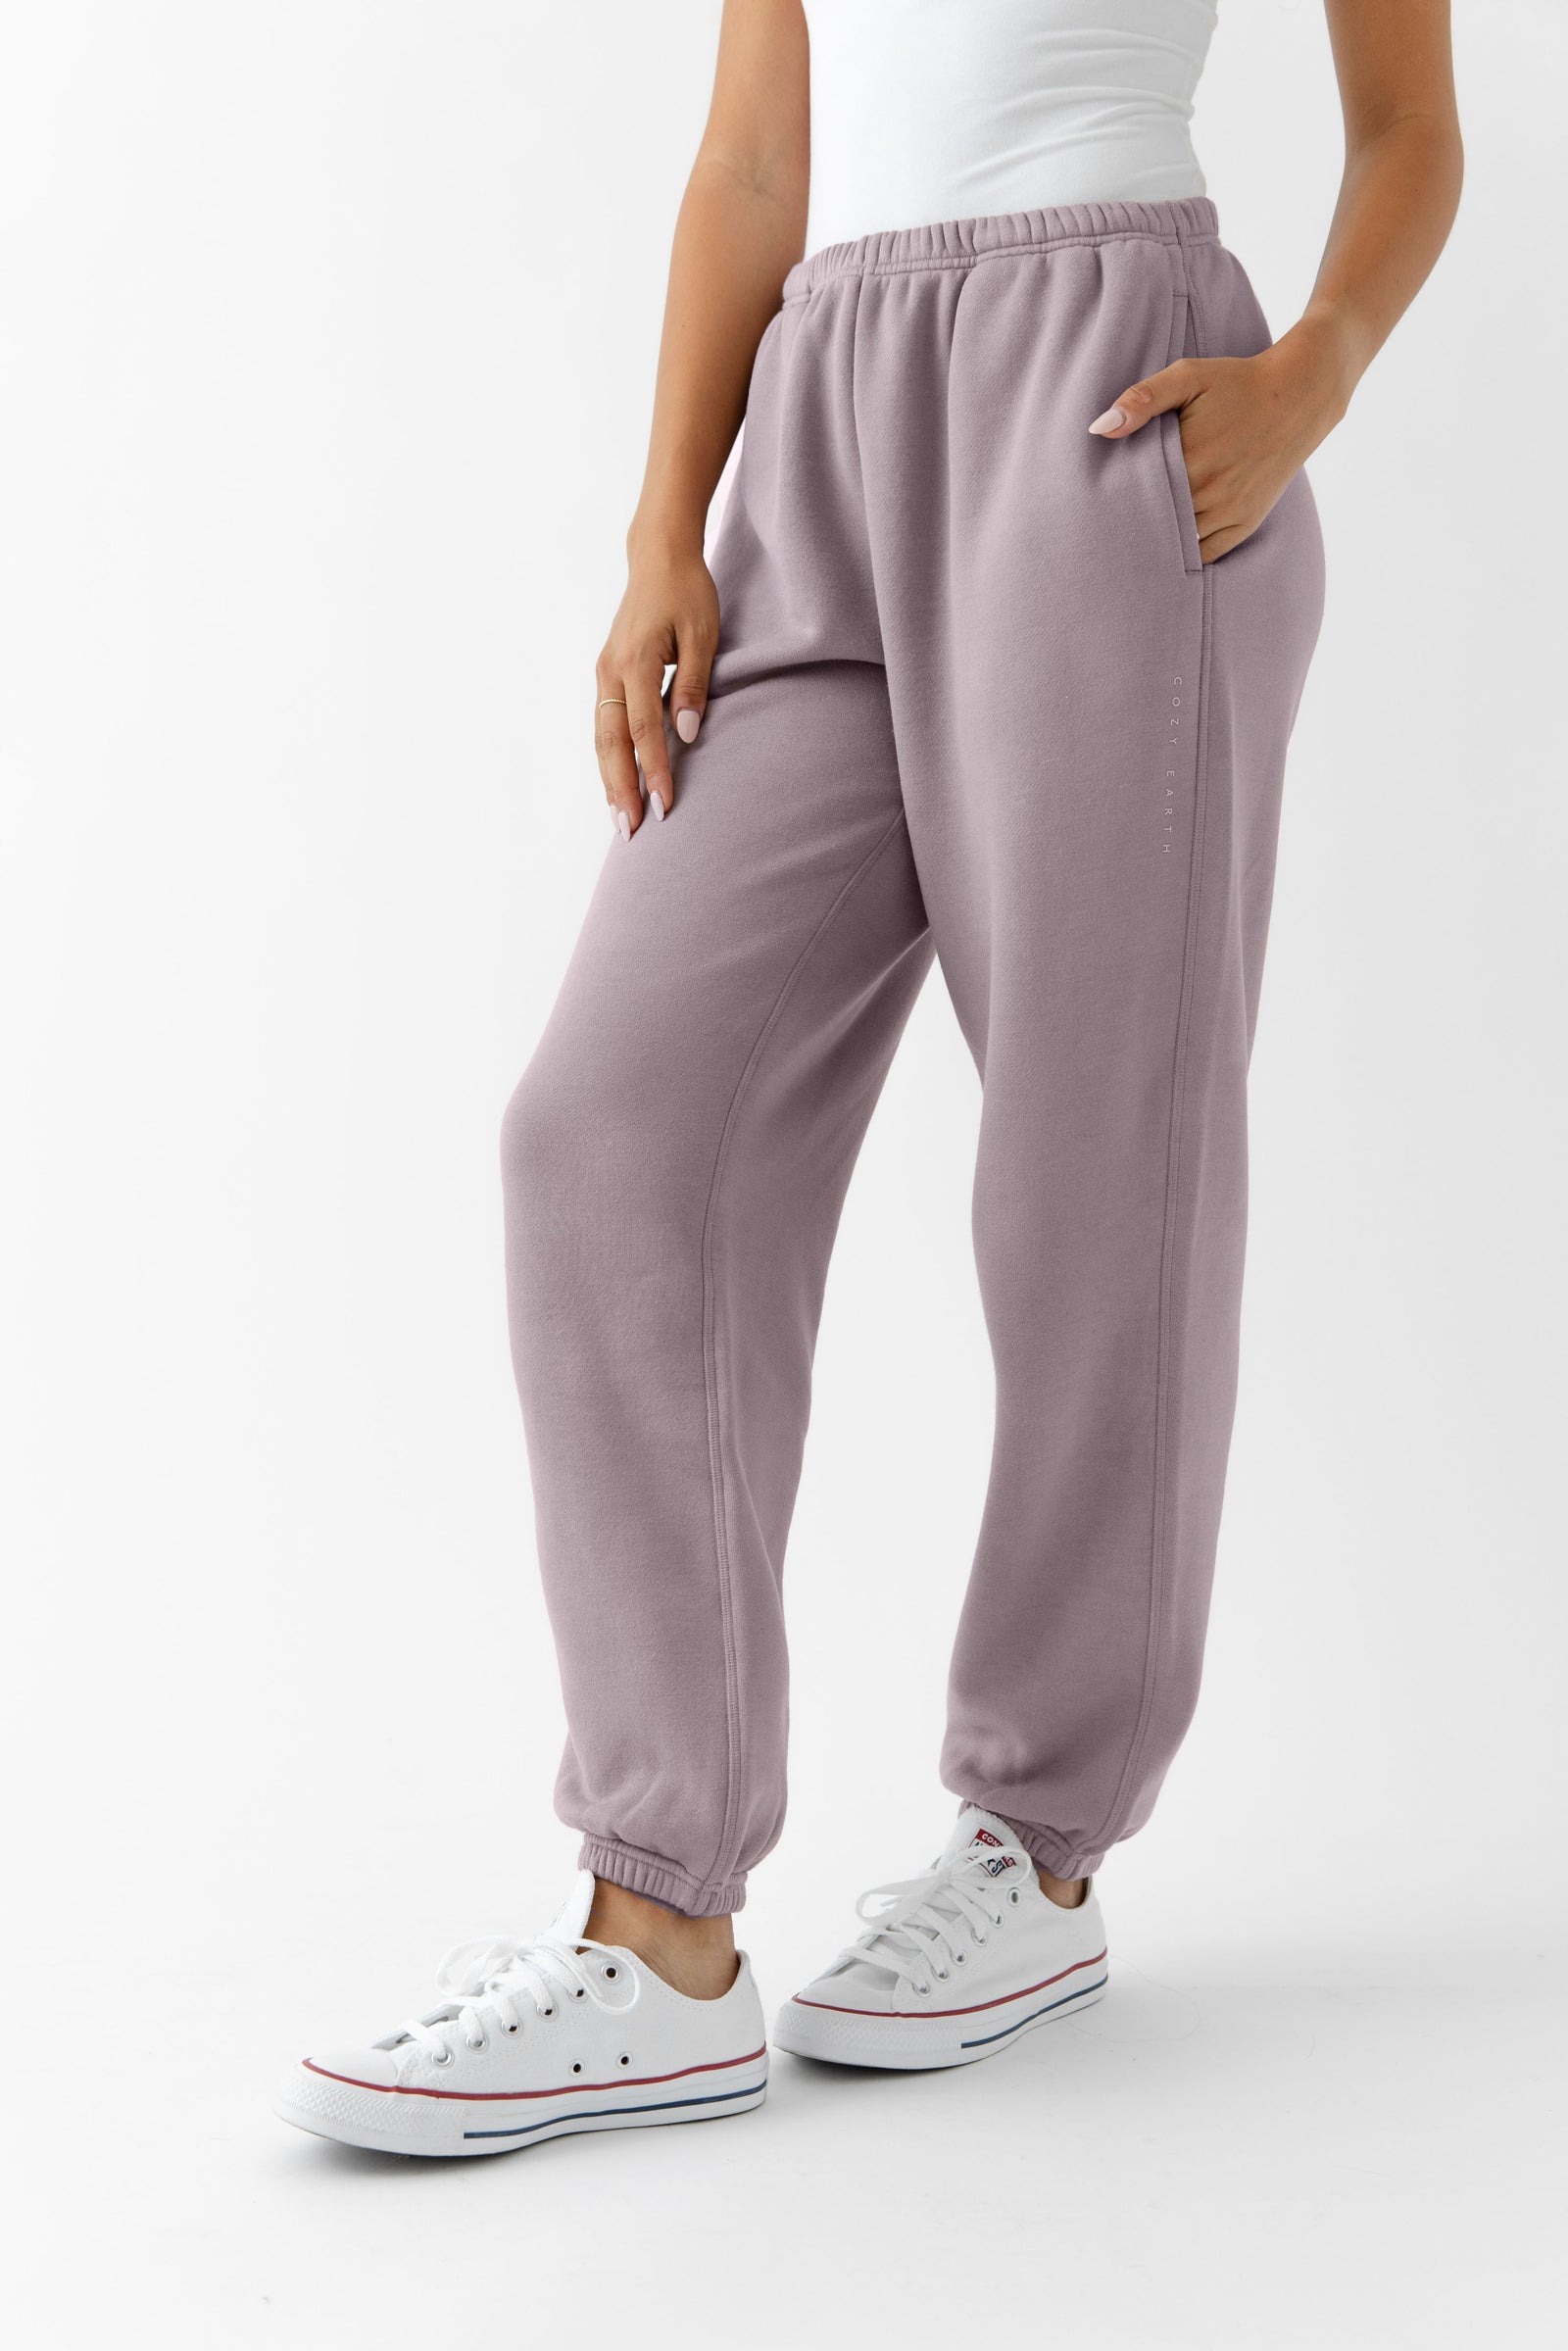 Dusty Orchid CityScape Joggers. The Joggers are being worn by a female model. The photo is taken from the waist down with the models hand in the pocket of the joggers. The back ground is white. 